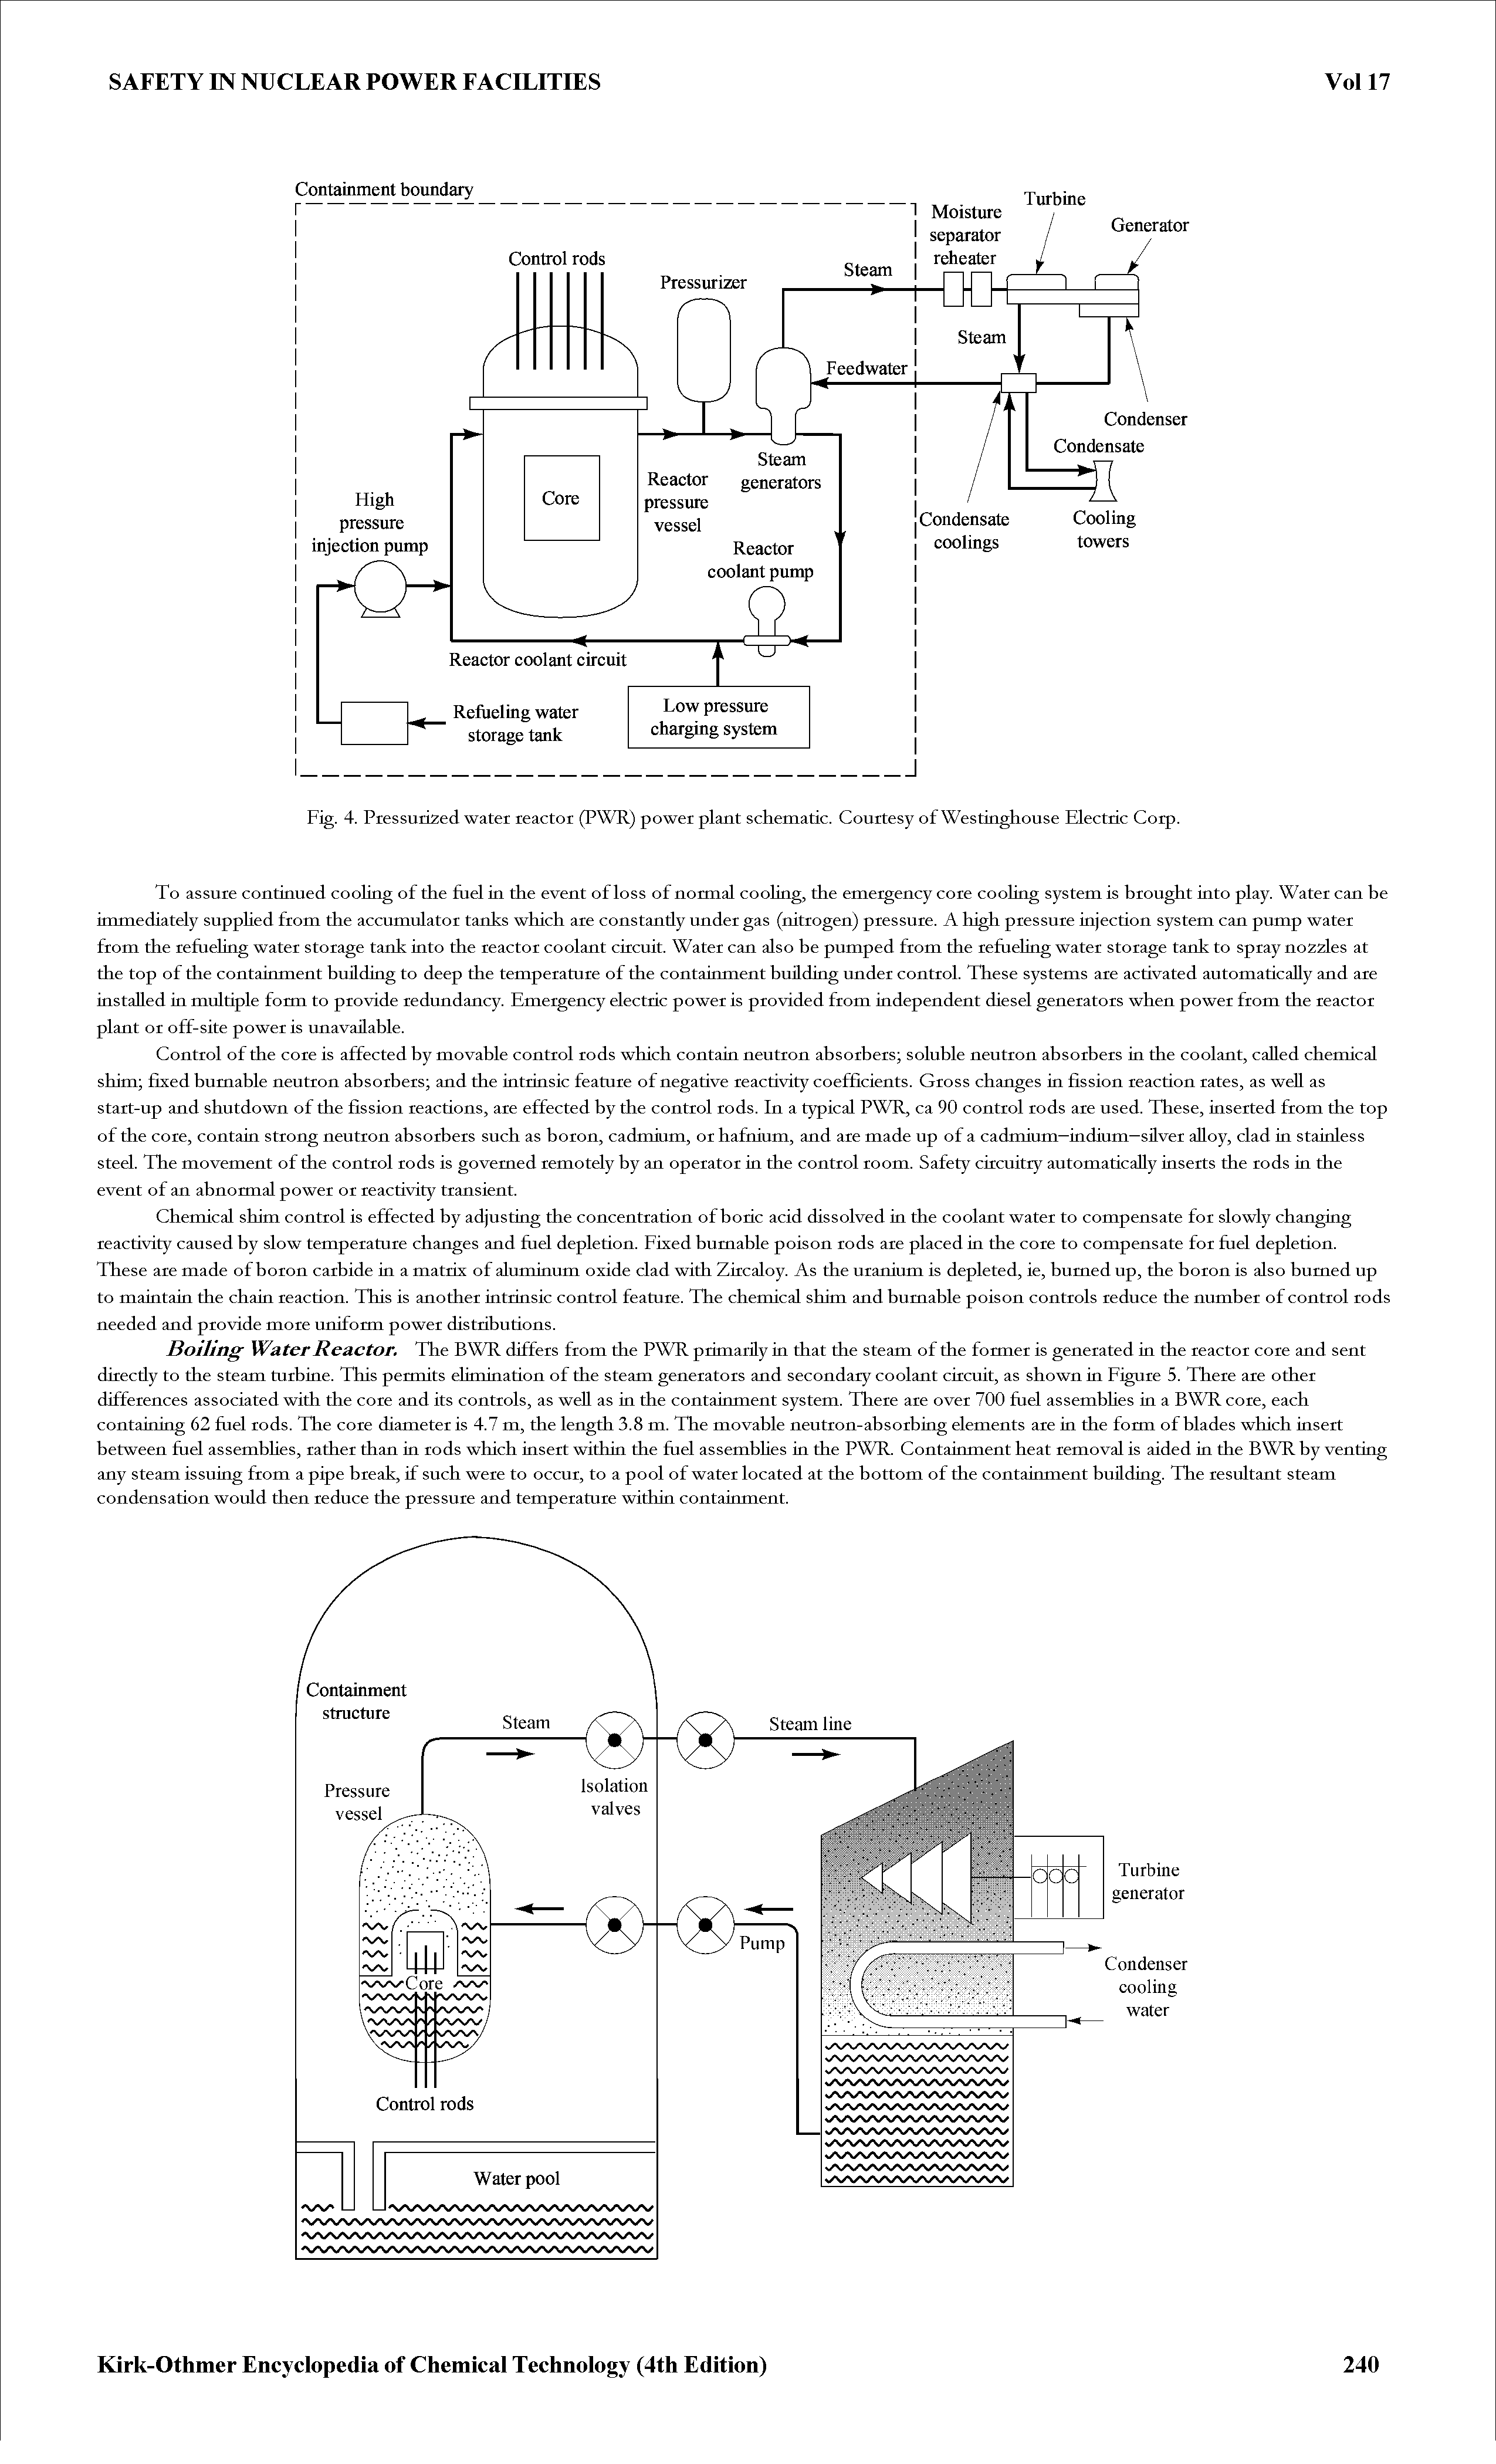 Fig. 4. Piessurized watei leactoi (PWR) powei plant schematic. Couitesy of Westinghouse Electric Corp.